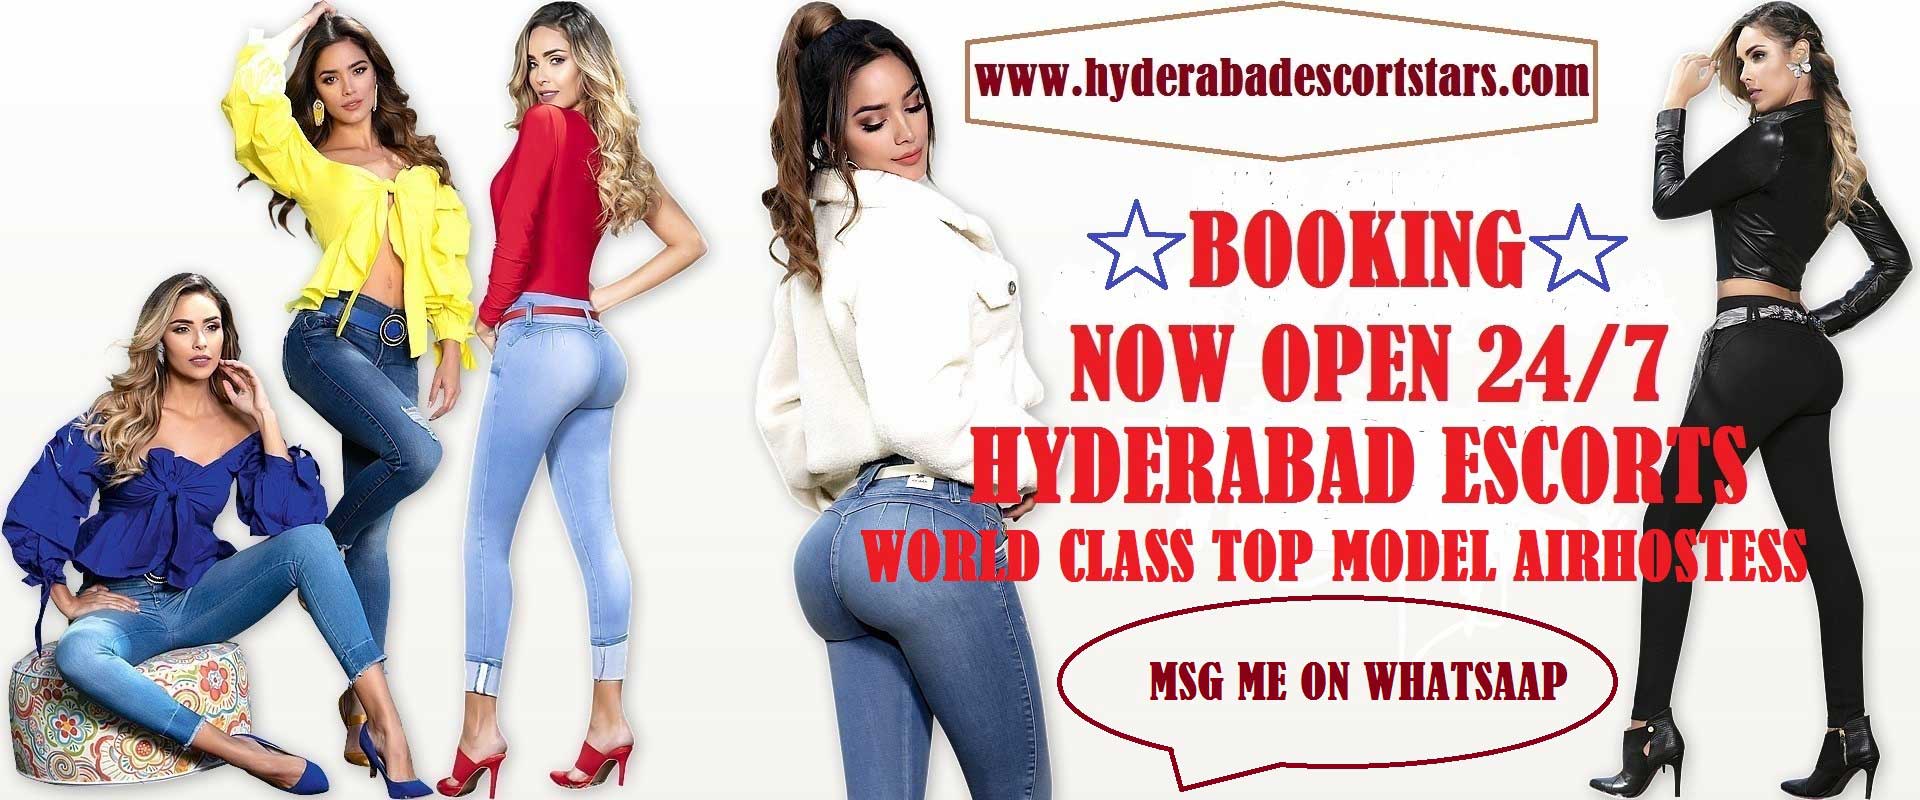 Hyderabad Escorts | stunning escorts for incalls and outcalls 24/7